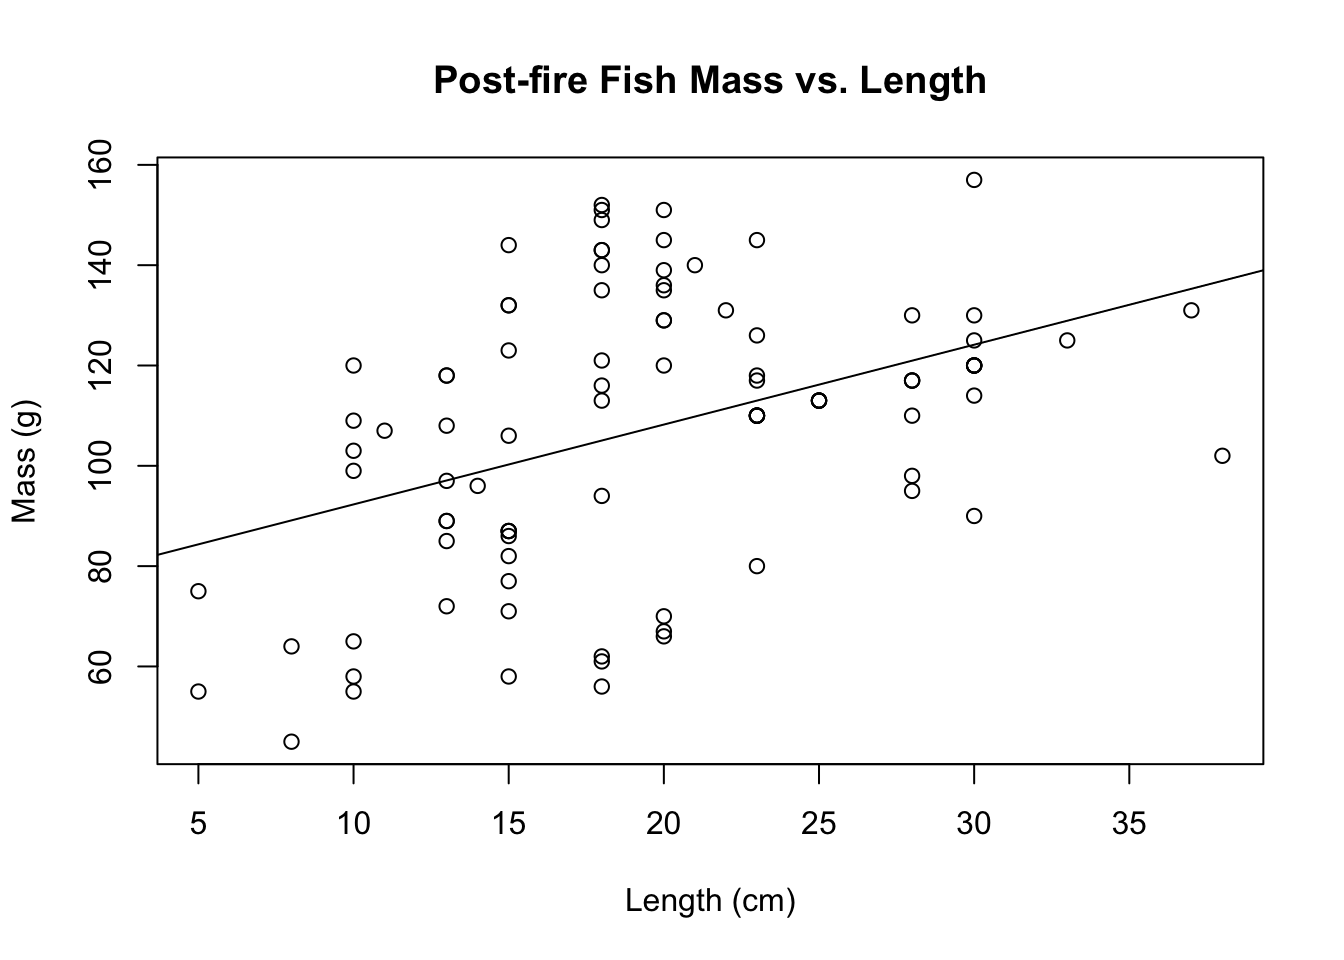 Scatterplot and linear regression line of fish length in centimeters versus fish mass in grams in Cache La Poudre in 2013 after the High Park Fire.